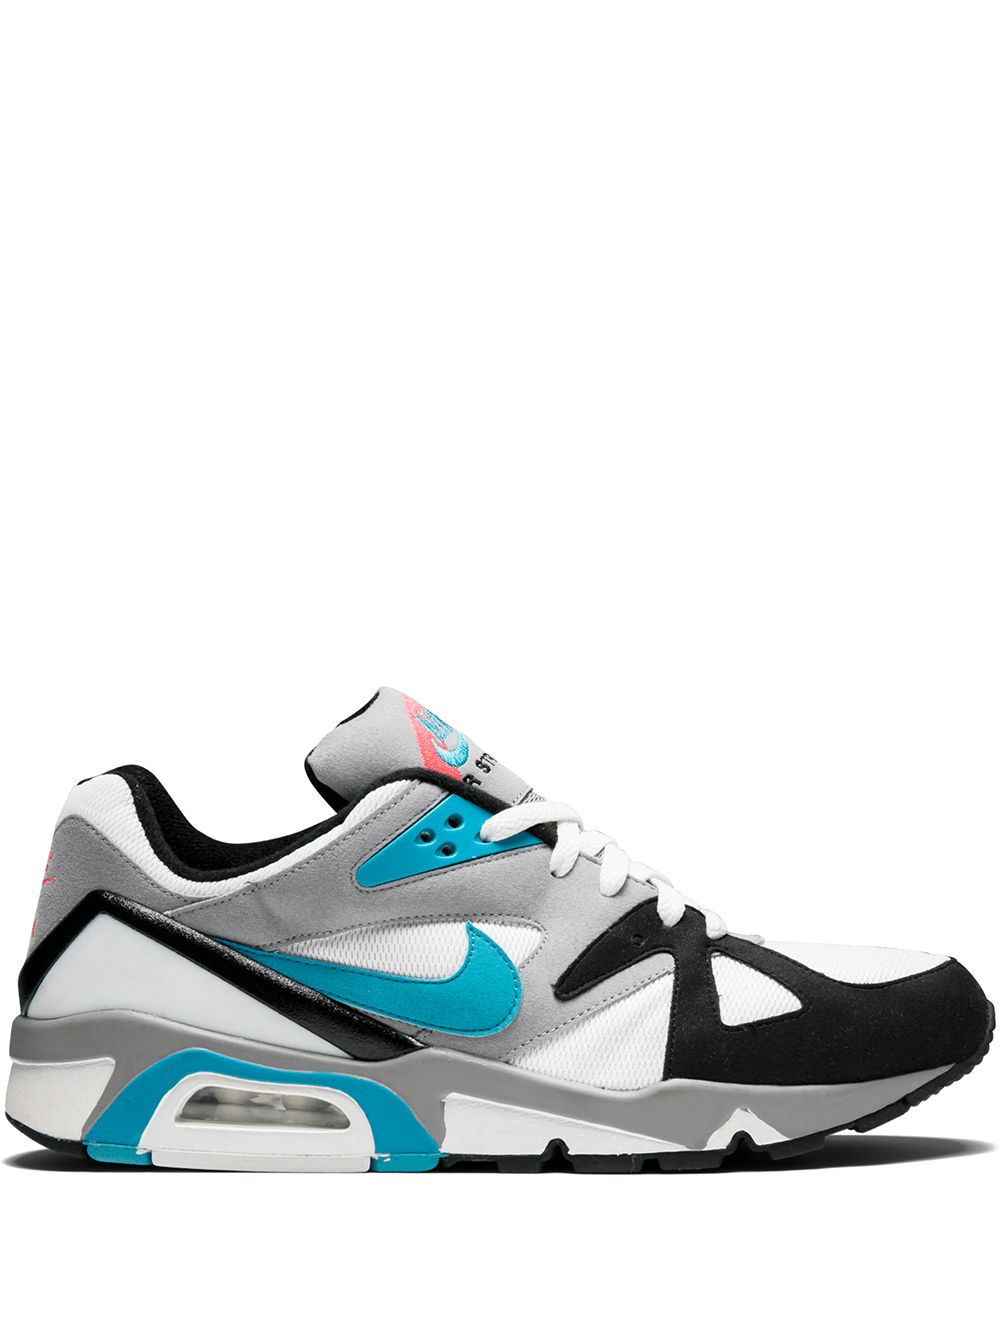 NIKE AIR STRUCTURE TRIAX 91 SNEAKERS